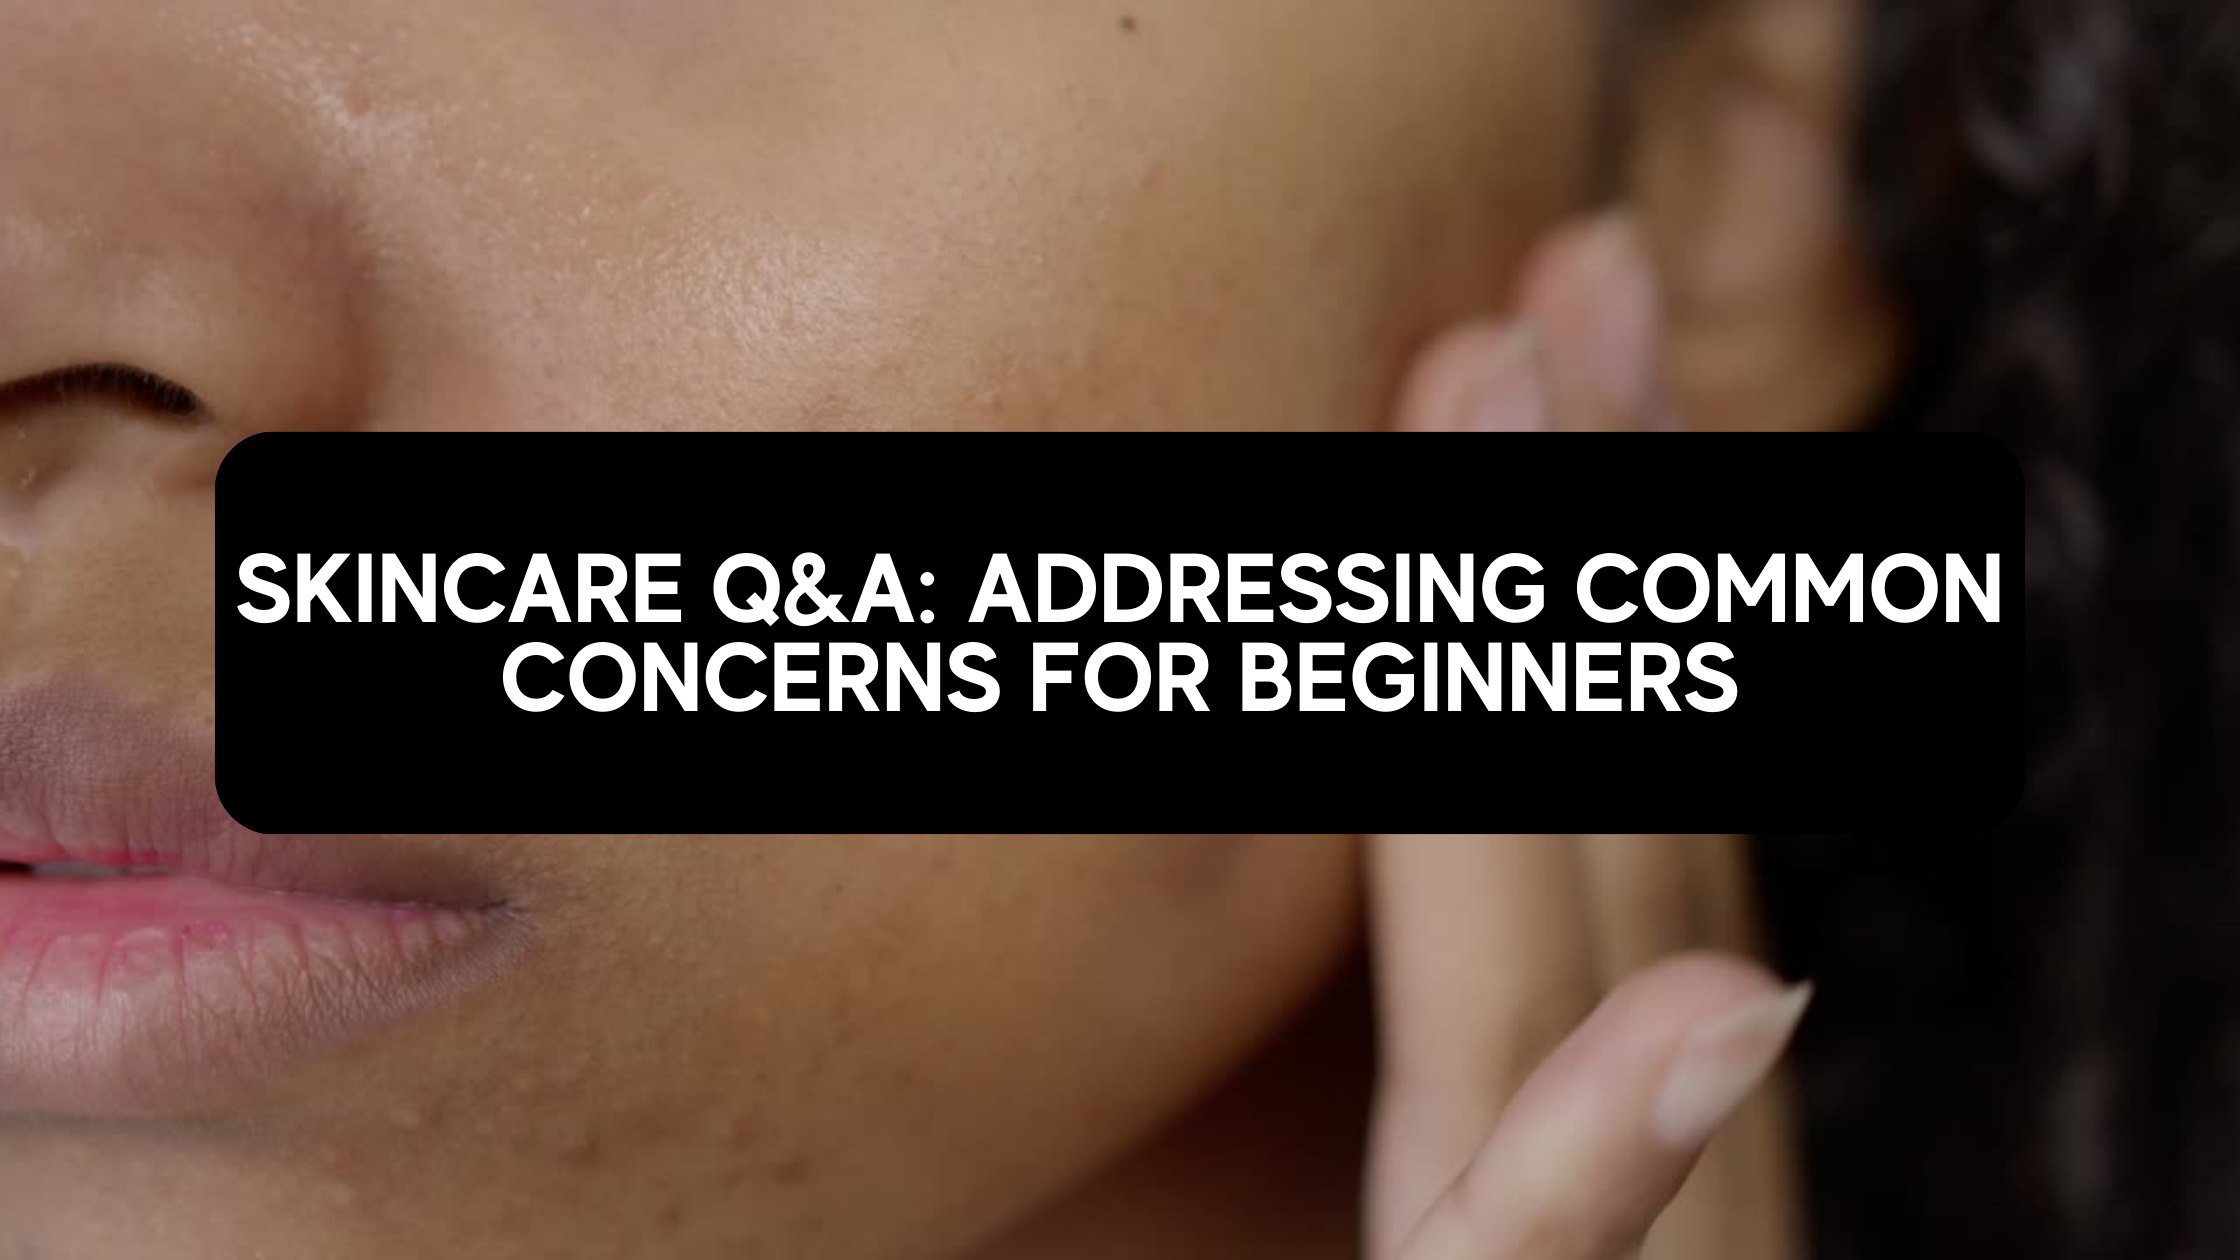 Skincare Q&A: Addressing Common Concerns for Beginners